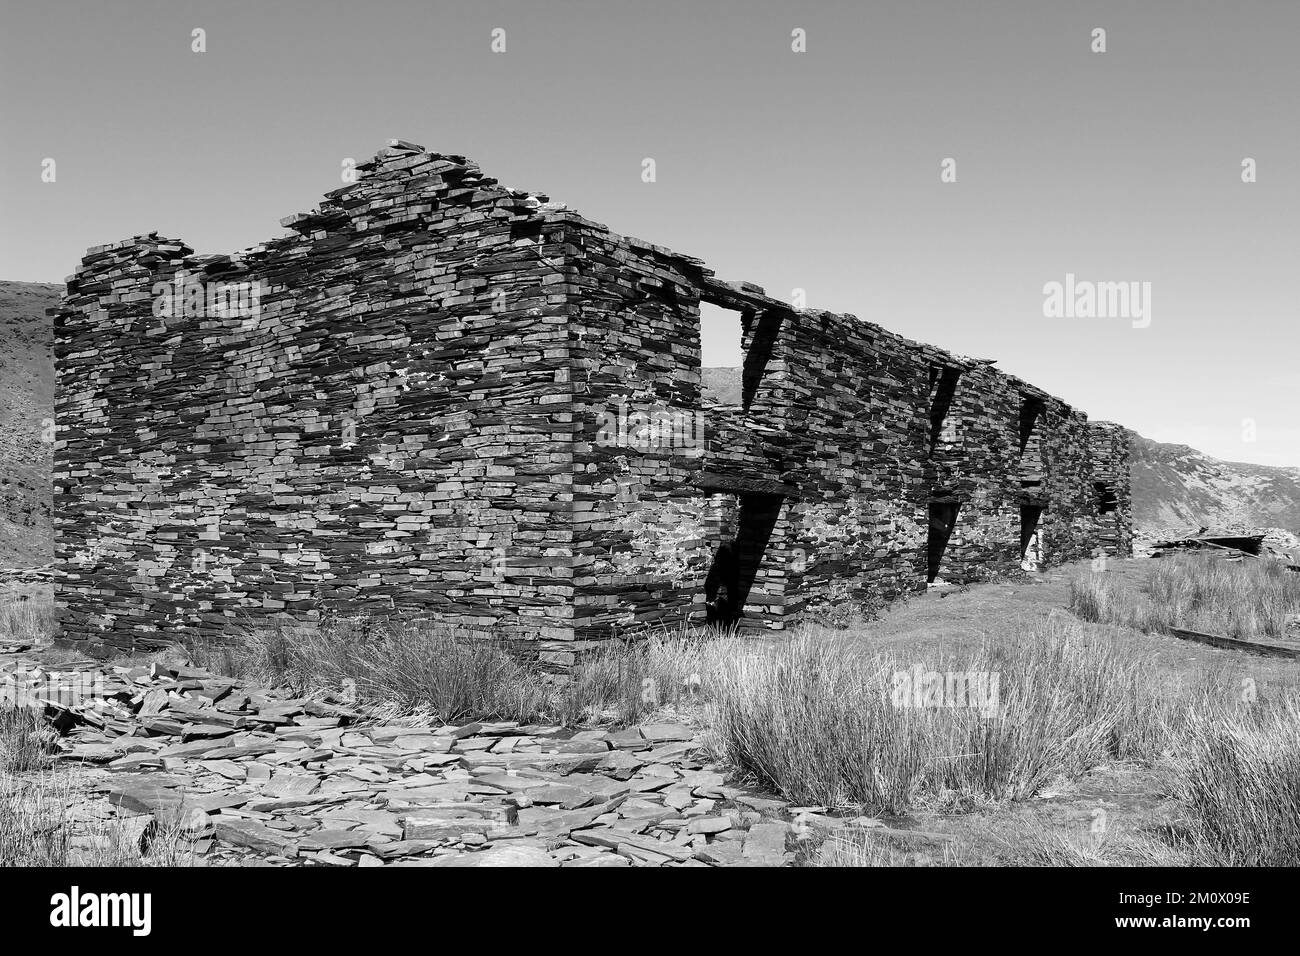 Cottage industry Black and White Stock Photos & Images - Alamy